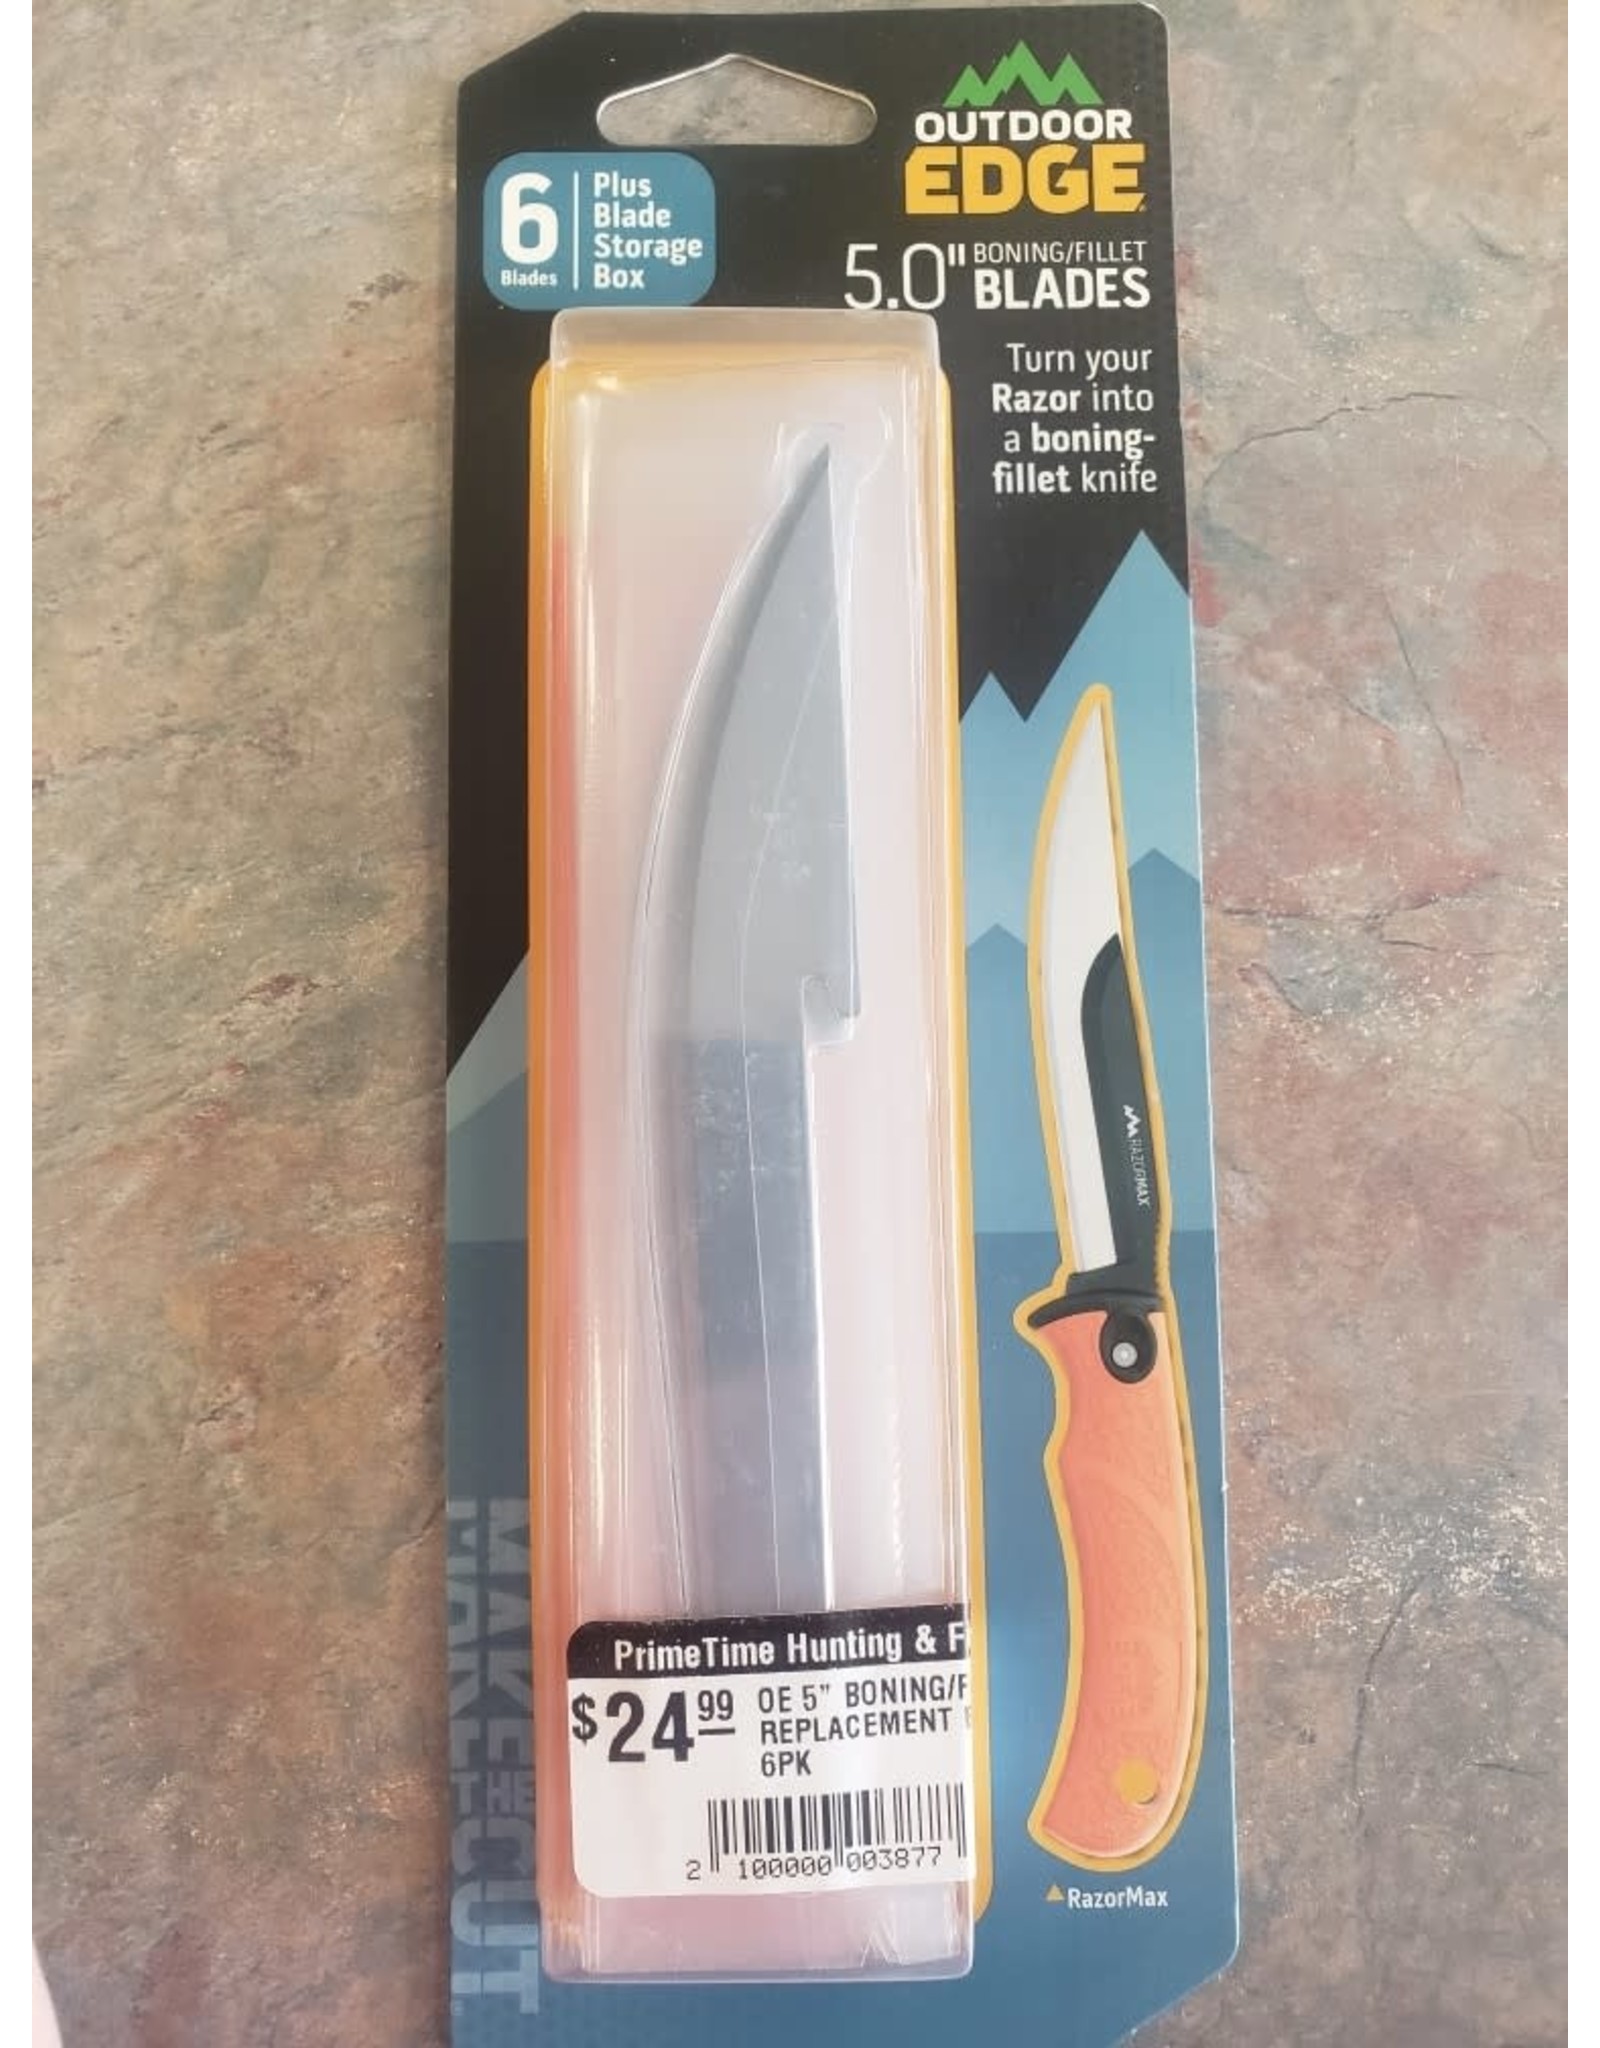 OUTDOOR EDGE OE 5" BONING/FILLET REPLACEMENT BLADES 6PK